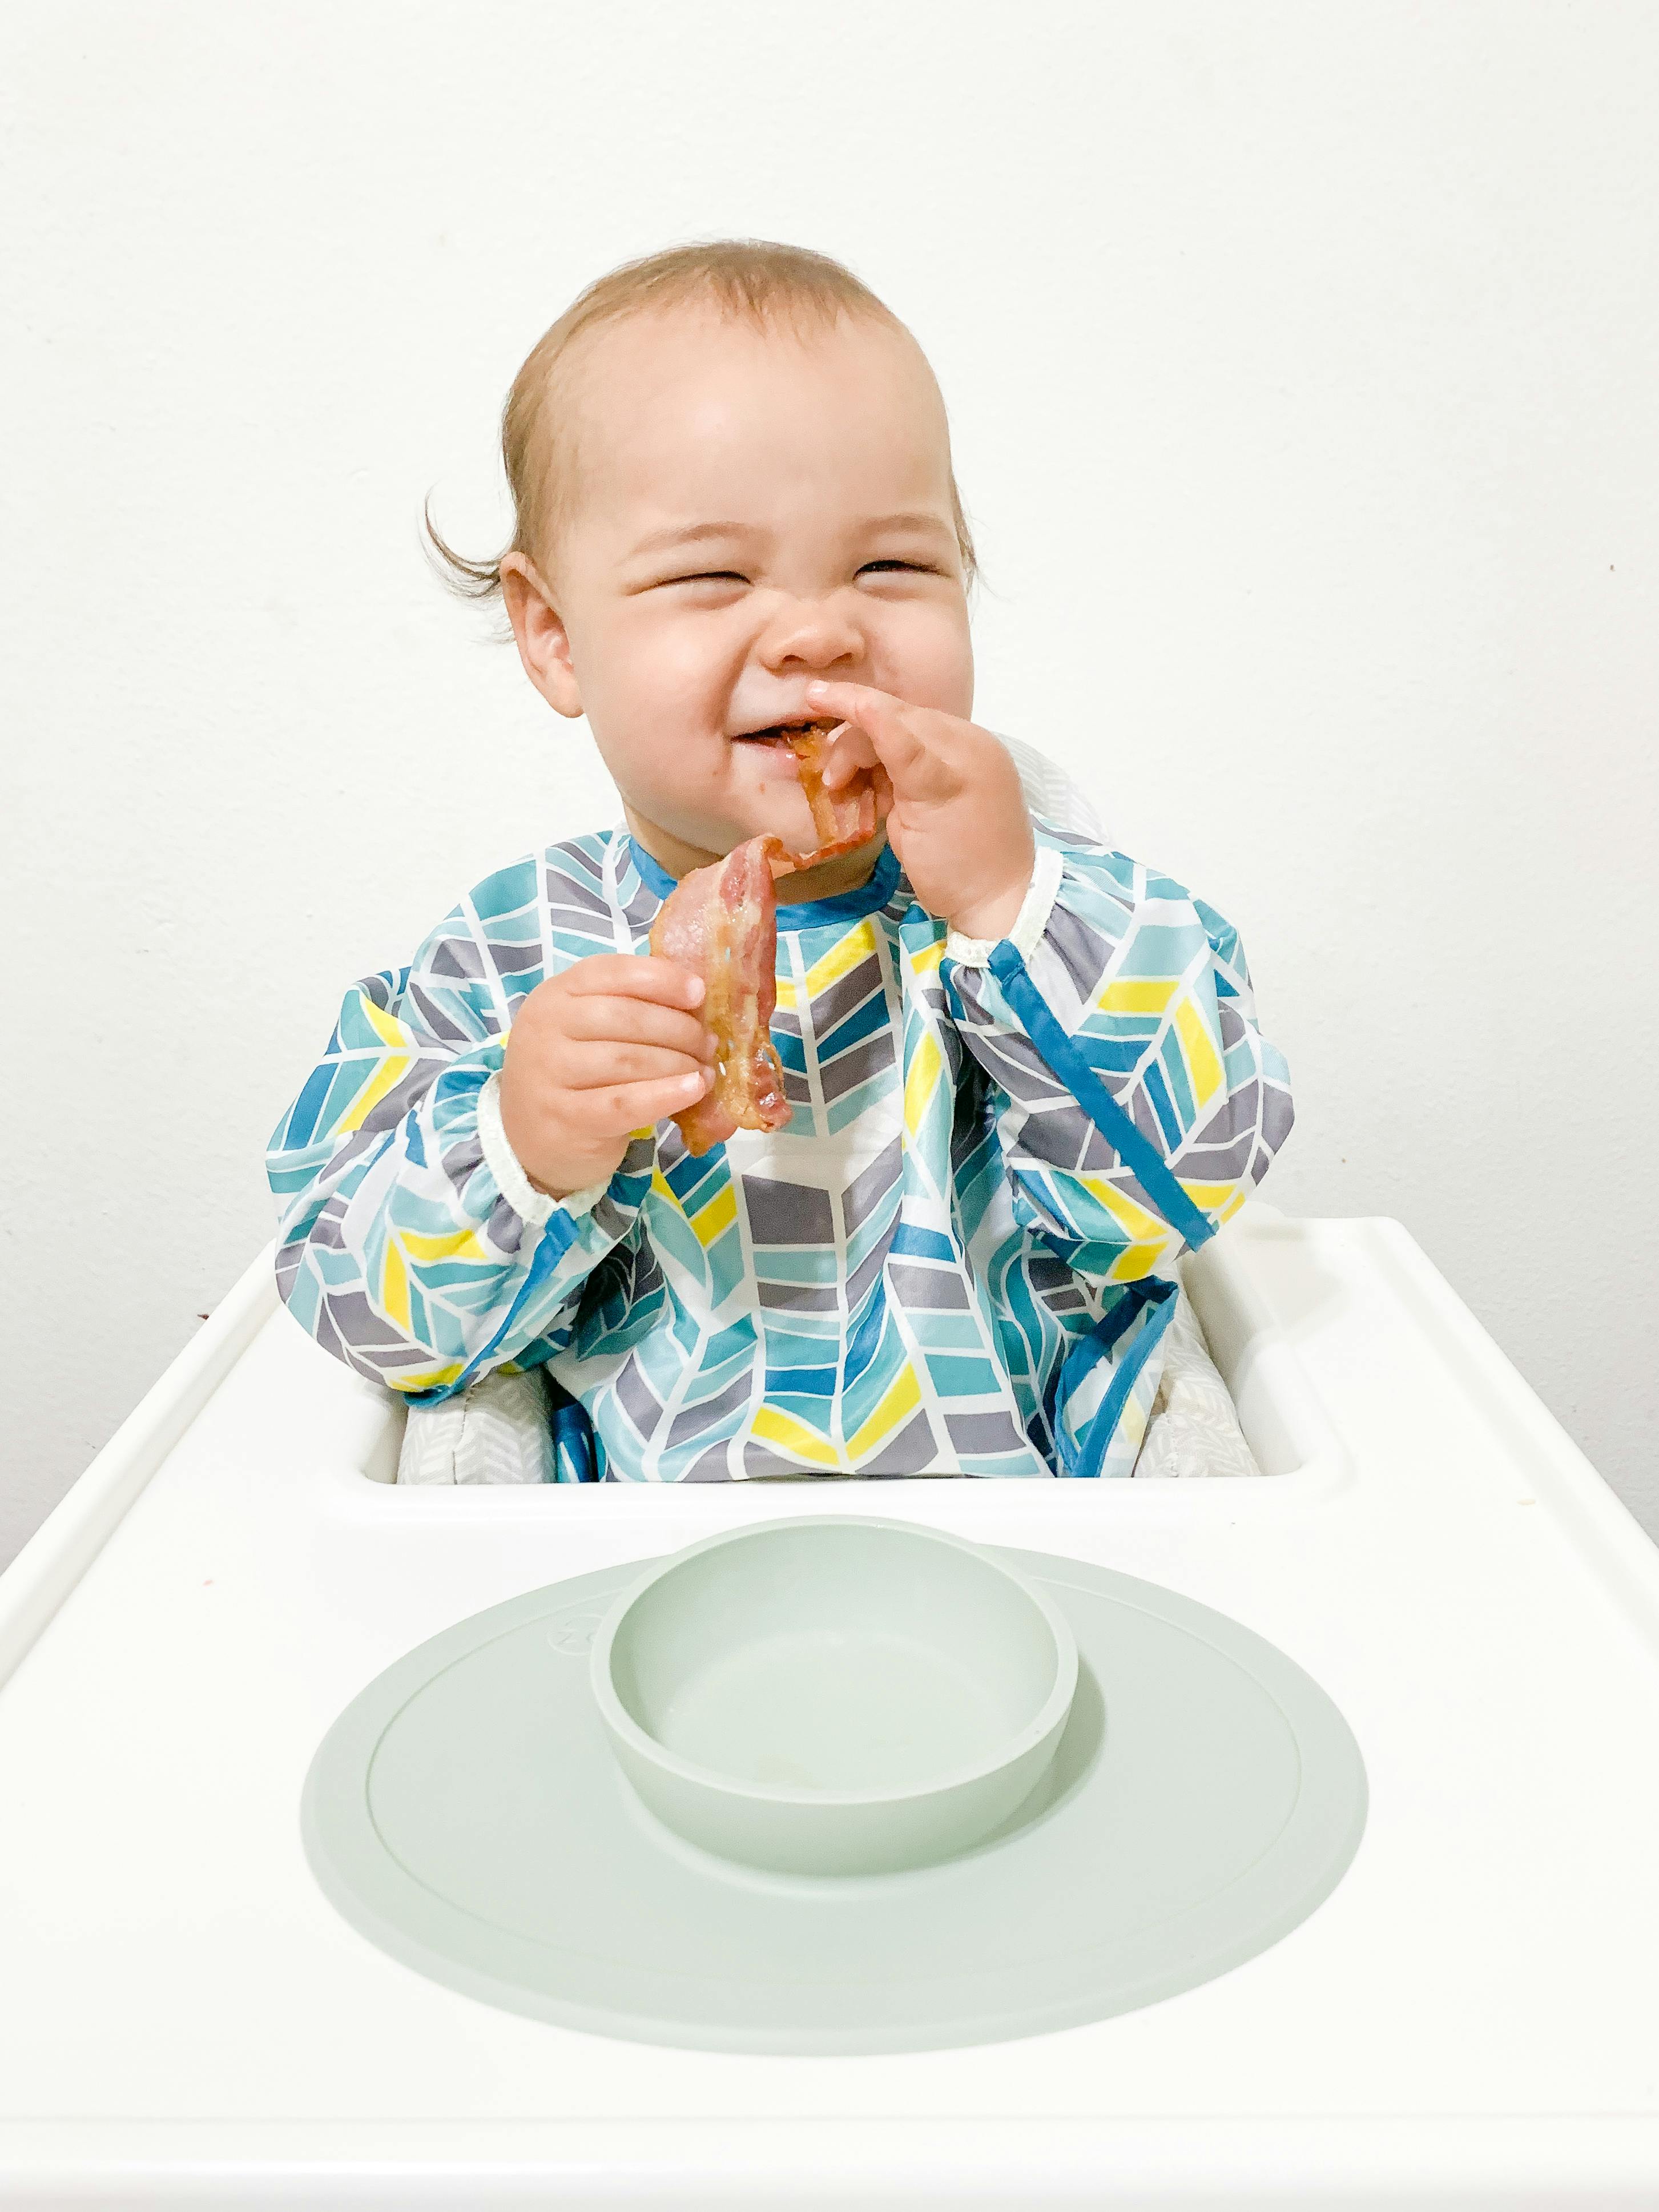 Photograph of a baby seated in a high chair bringing a strip of bacon from an ezpz Tiny Bowl to his mouth using both hands and smiling.